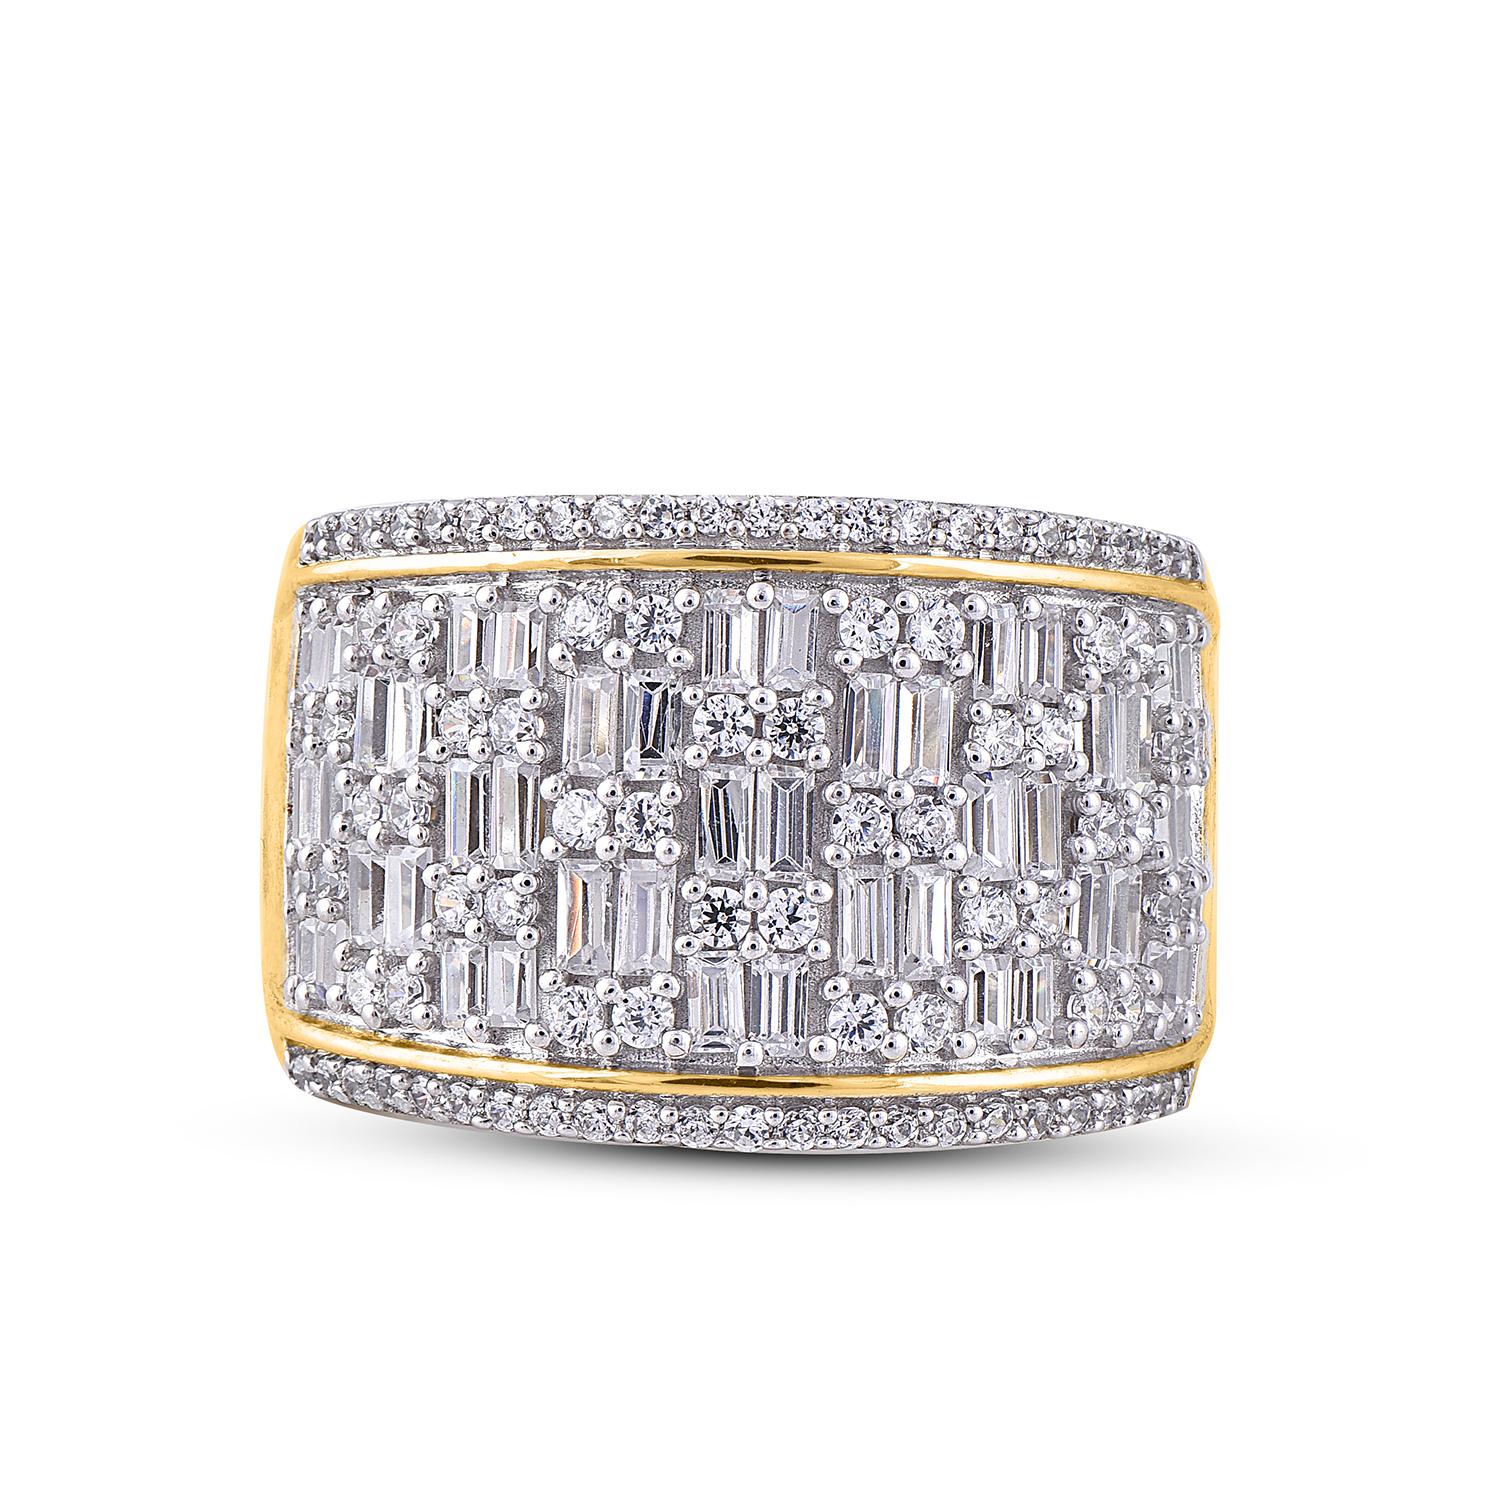 Truly exquisite, this diamond engagement band is sure to be admired for the inherent classic beauty and elegance within its design. The total weight of diamonds 1.50 carat, H-I color, I2 Clarity. This ring is beautifully crafted in 18K yellow gold